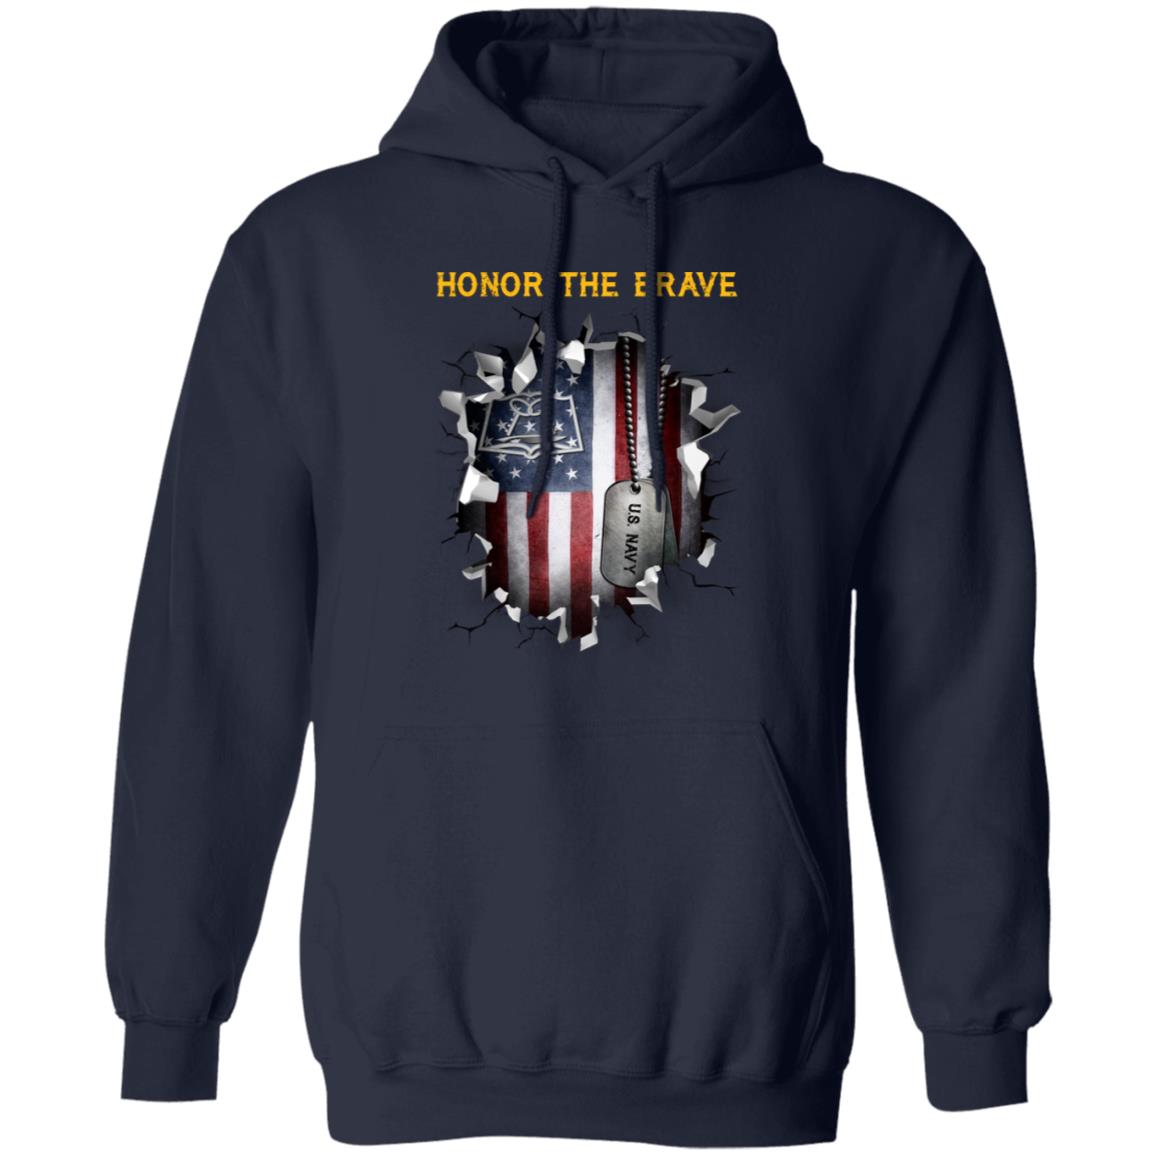 Navy Mess Management Specialist Navy MS - Honor The Brave Front Shirt